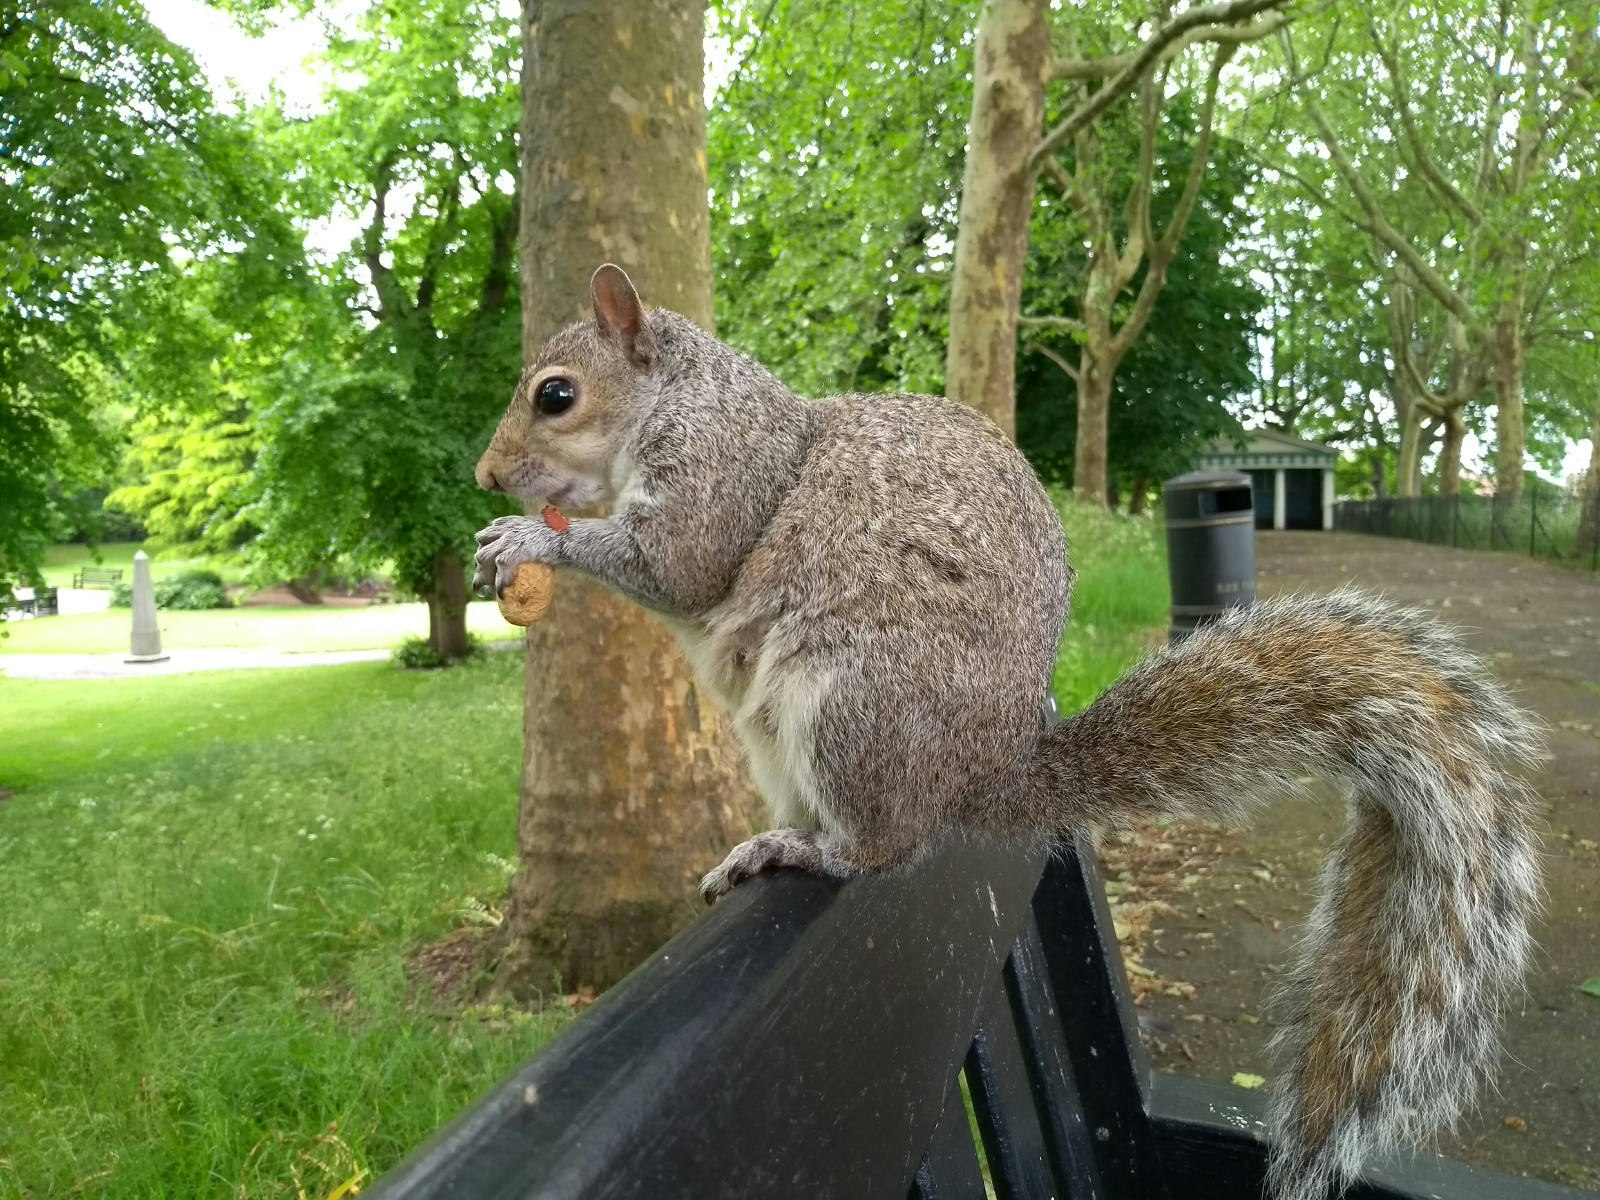 A close up of a squirrel nibbling a nut while holding it in their paws. They are on a black park bench and trees and grass are visible in the background.